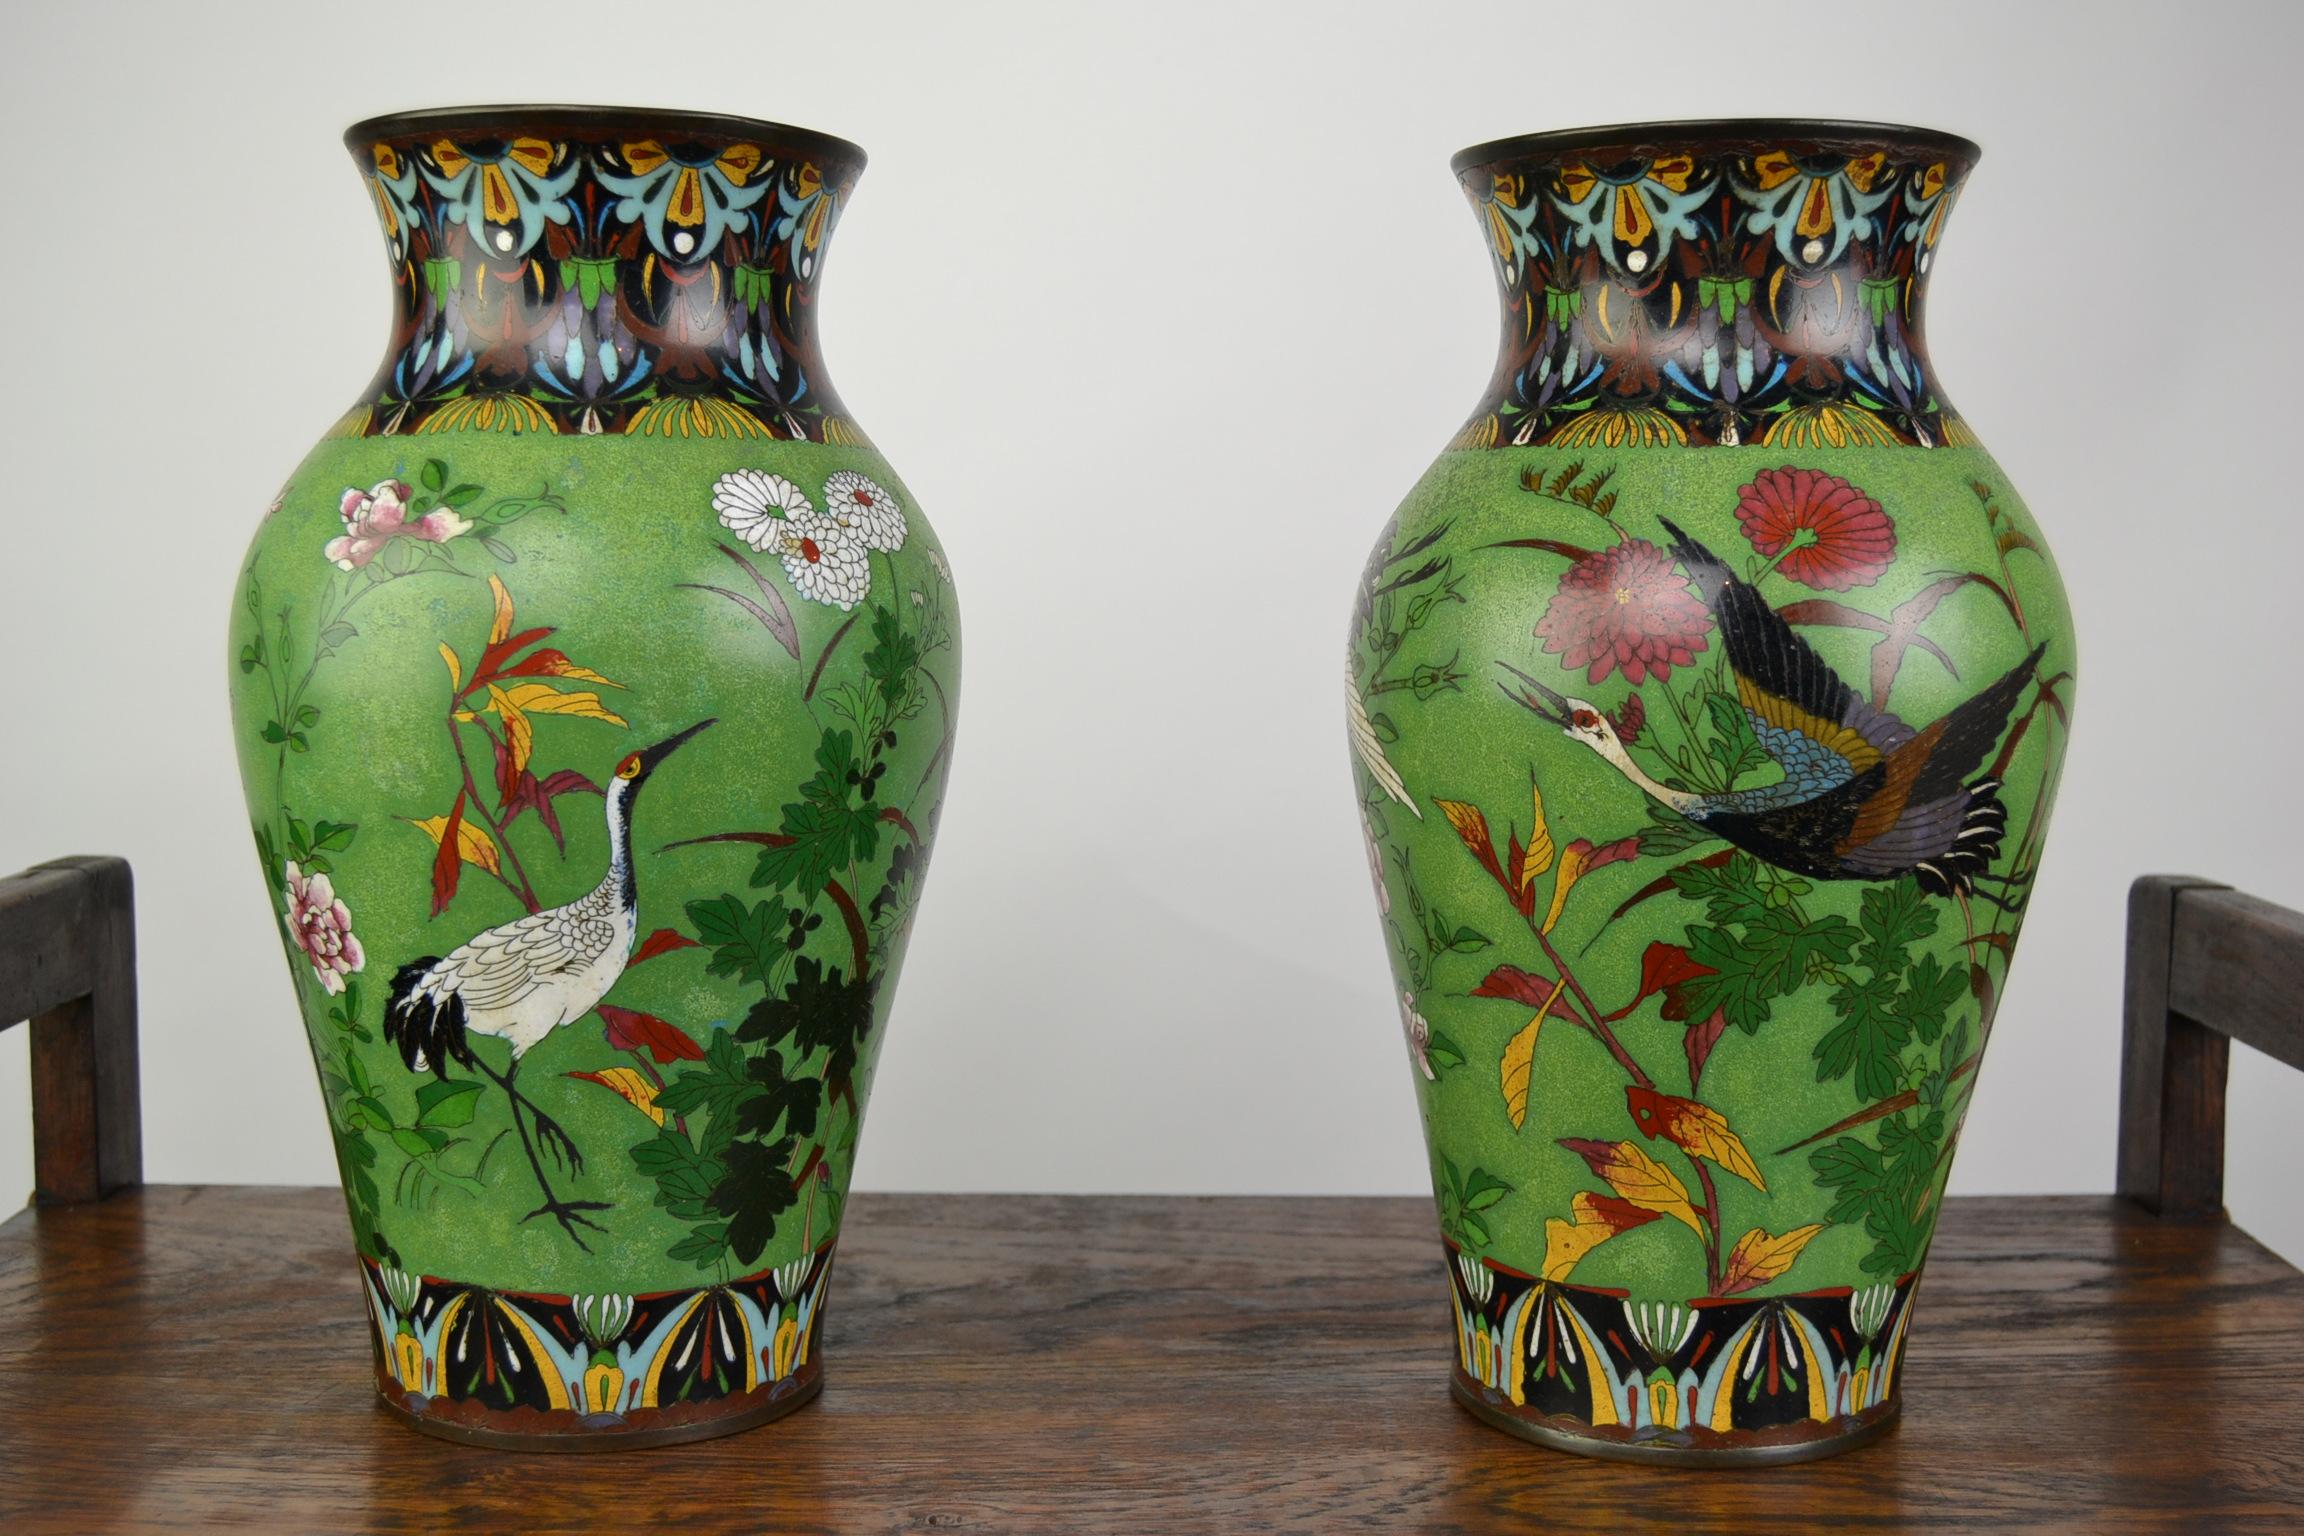 Pair of Japanese Cloisonne Enamel on Copper Vases with Crane Birds and Flowers  3